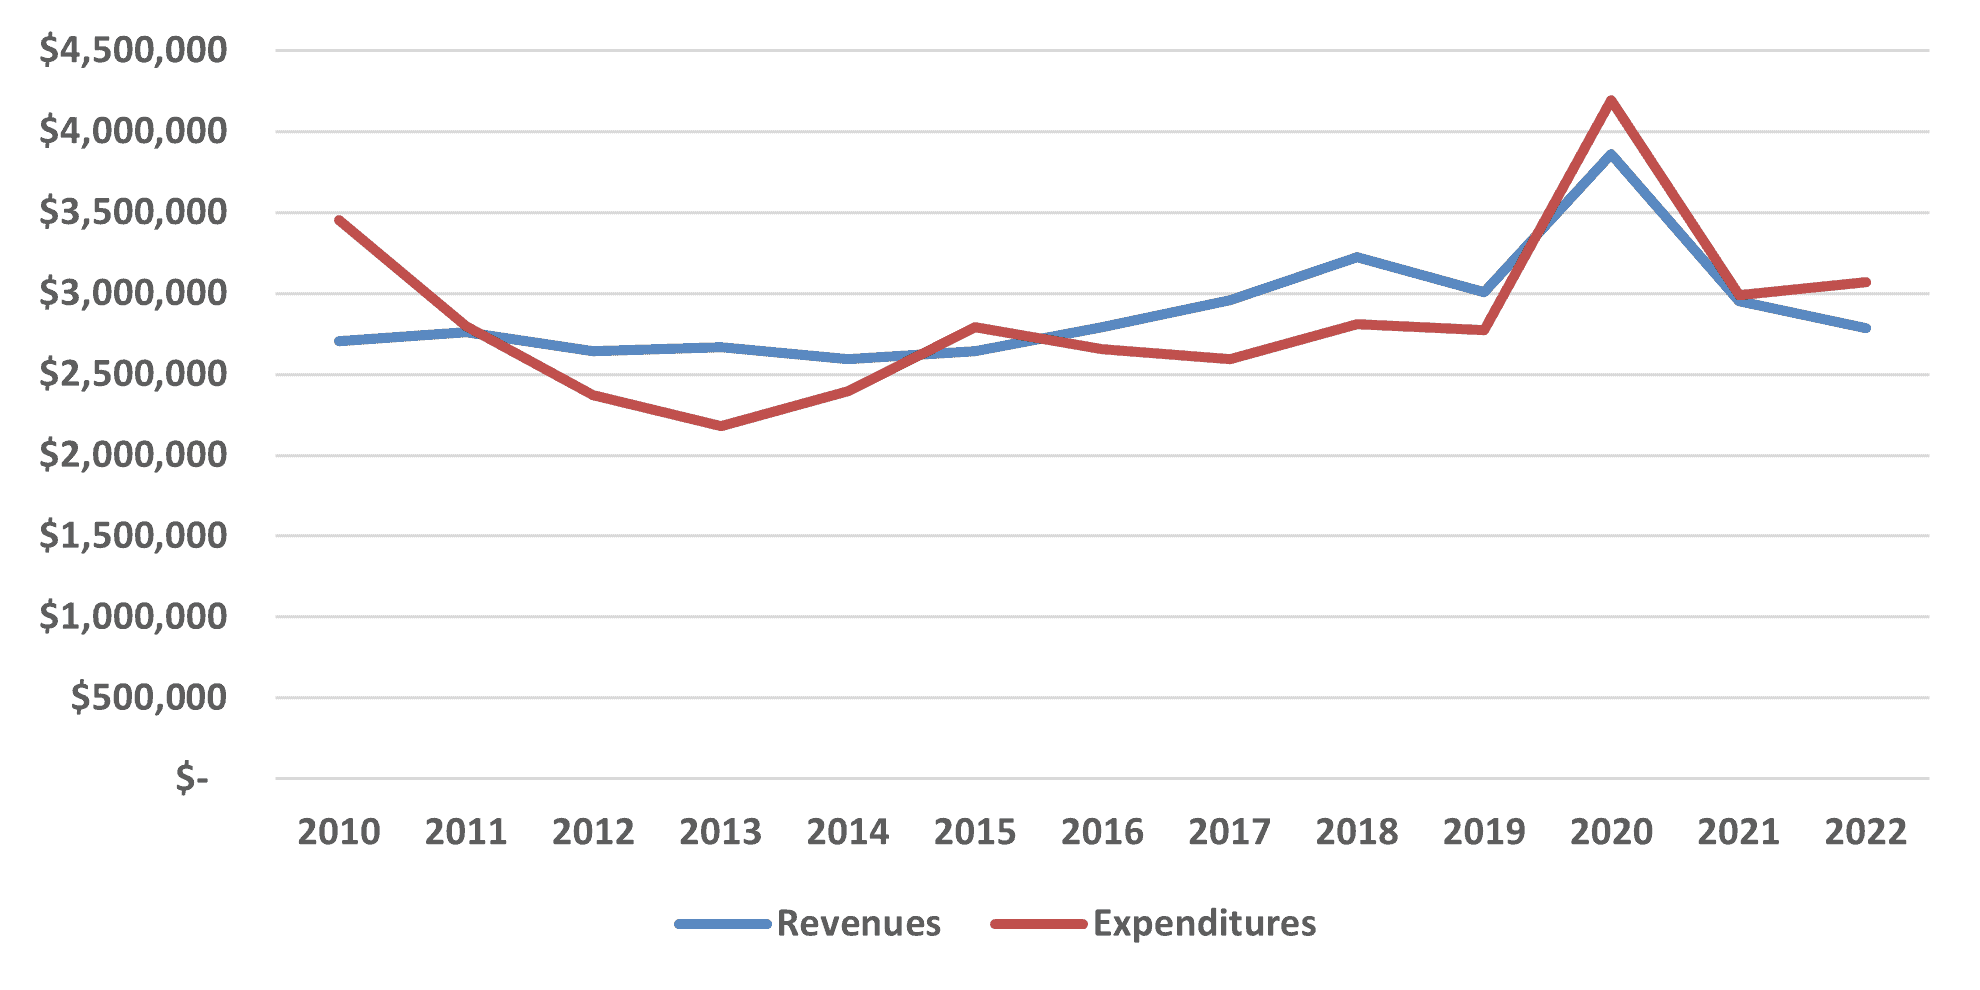 Historical Revenues vs. Expenditures, Total and Per Capita, 2010 to 2022 (2023$)